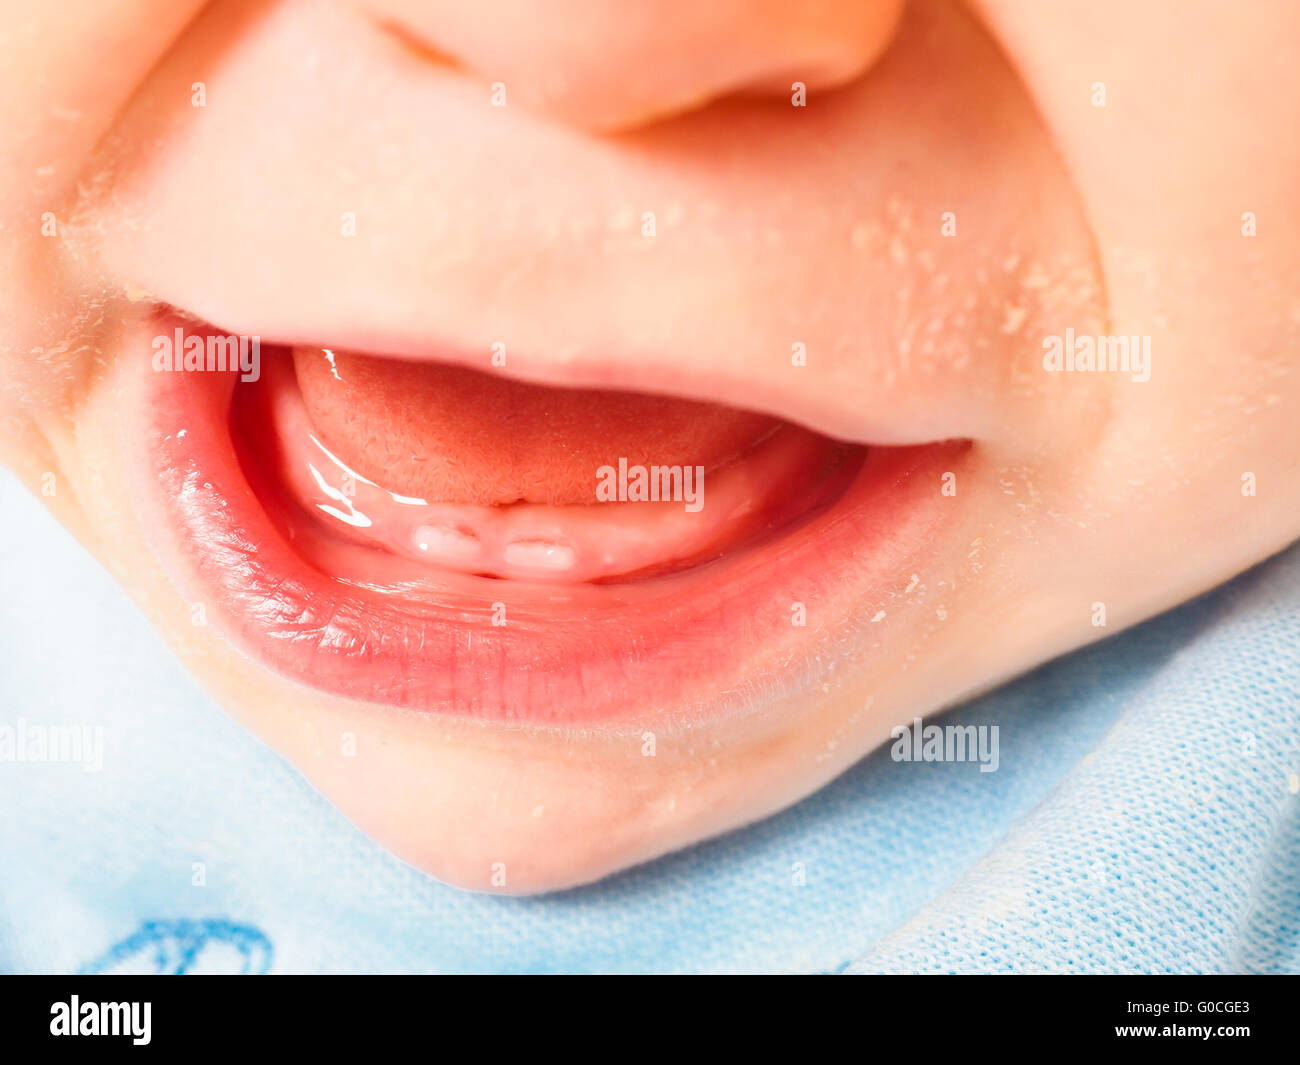 Baby boy showing first teeth Stock Photo